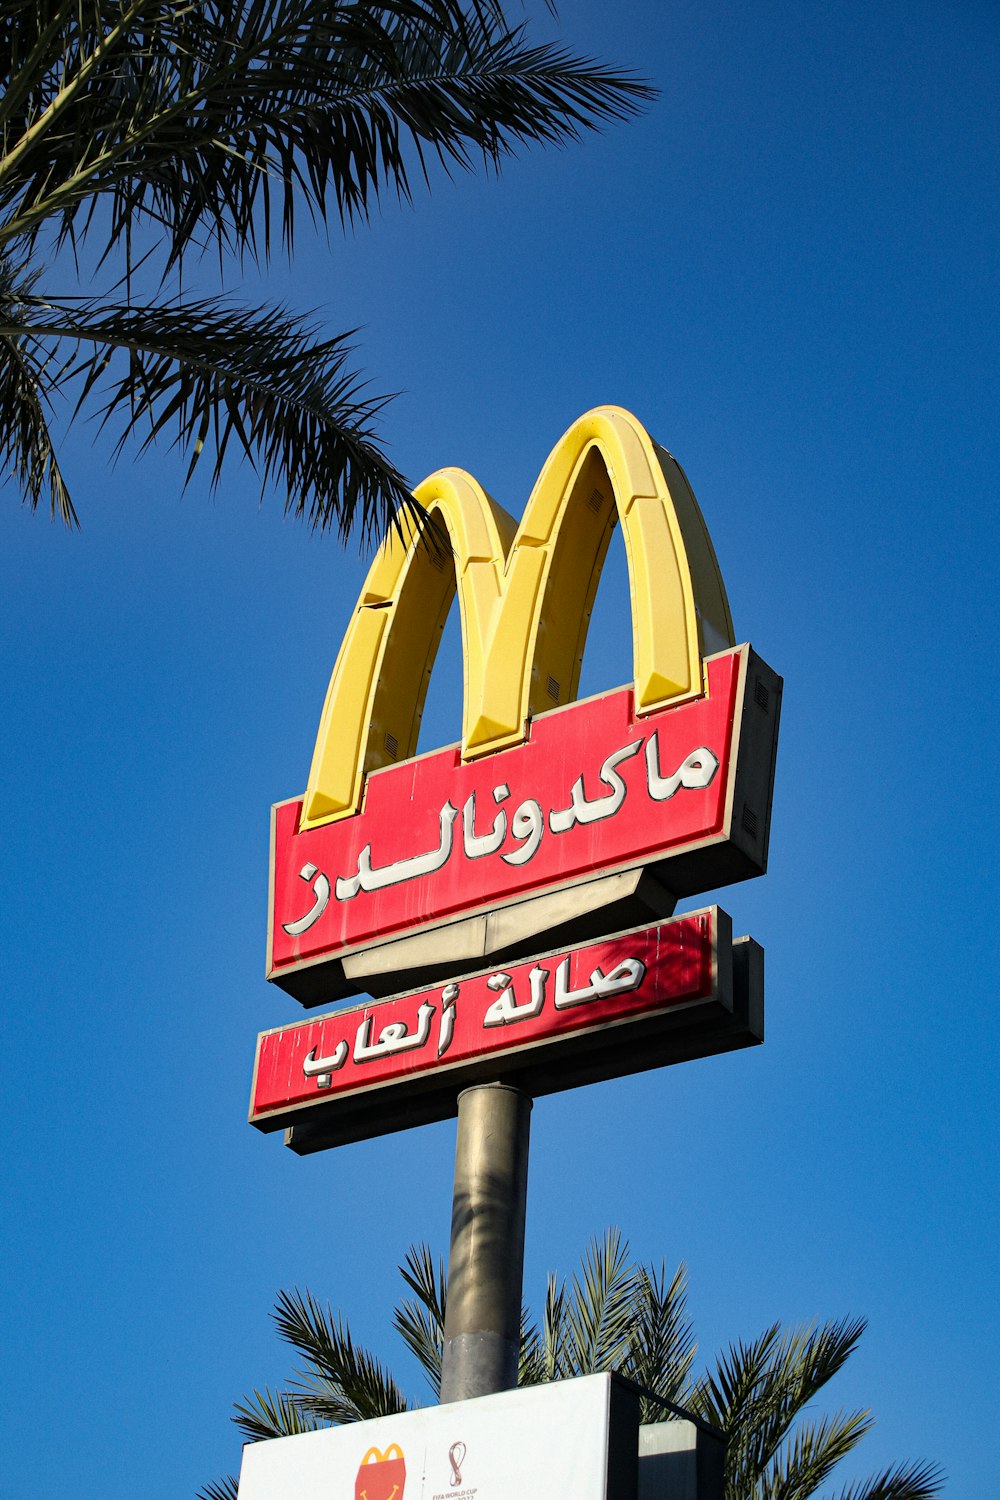 a sign for a fast food restaurant in arabic